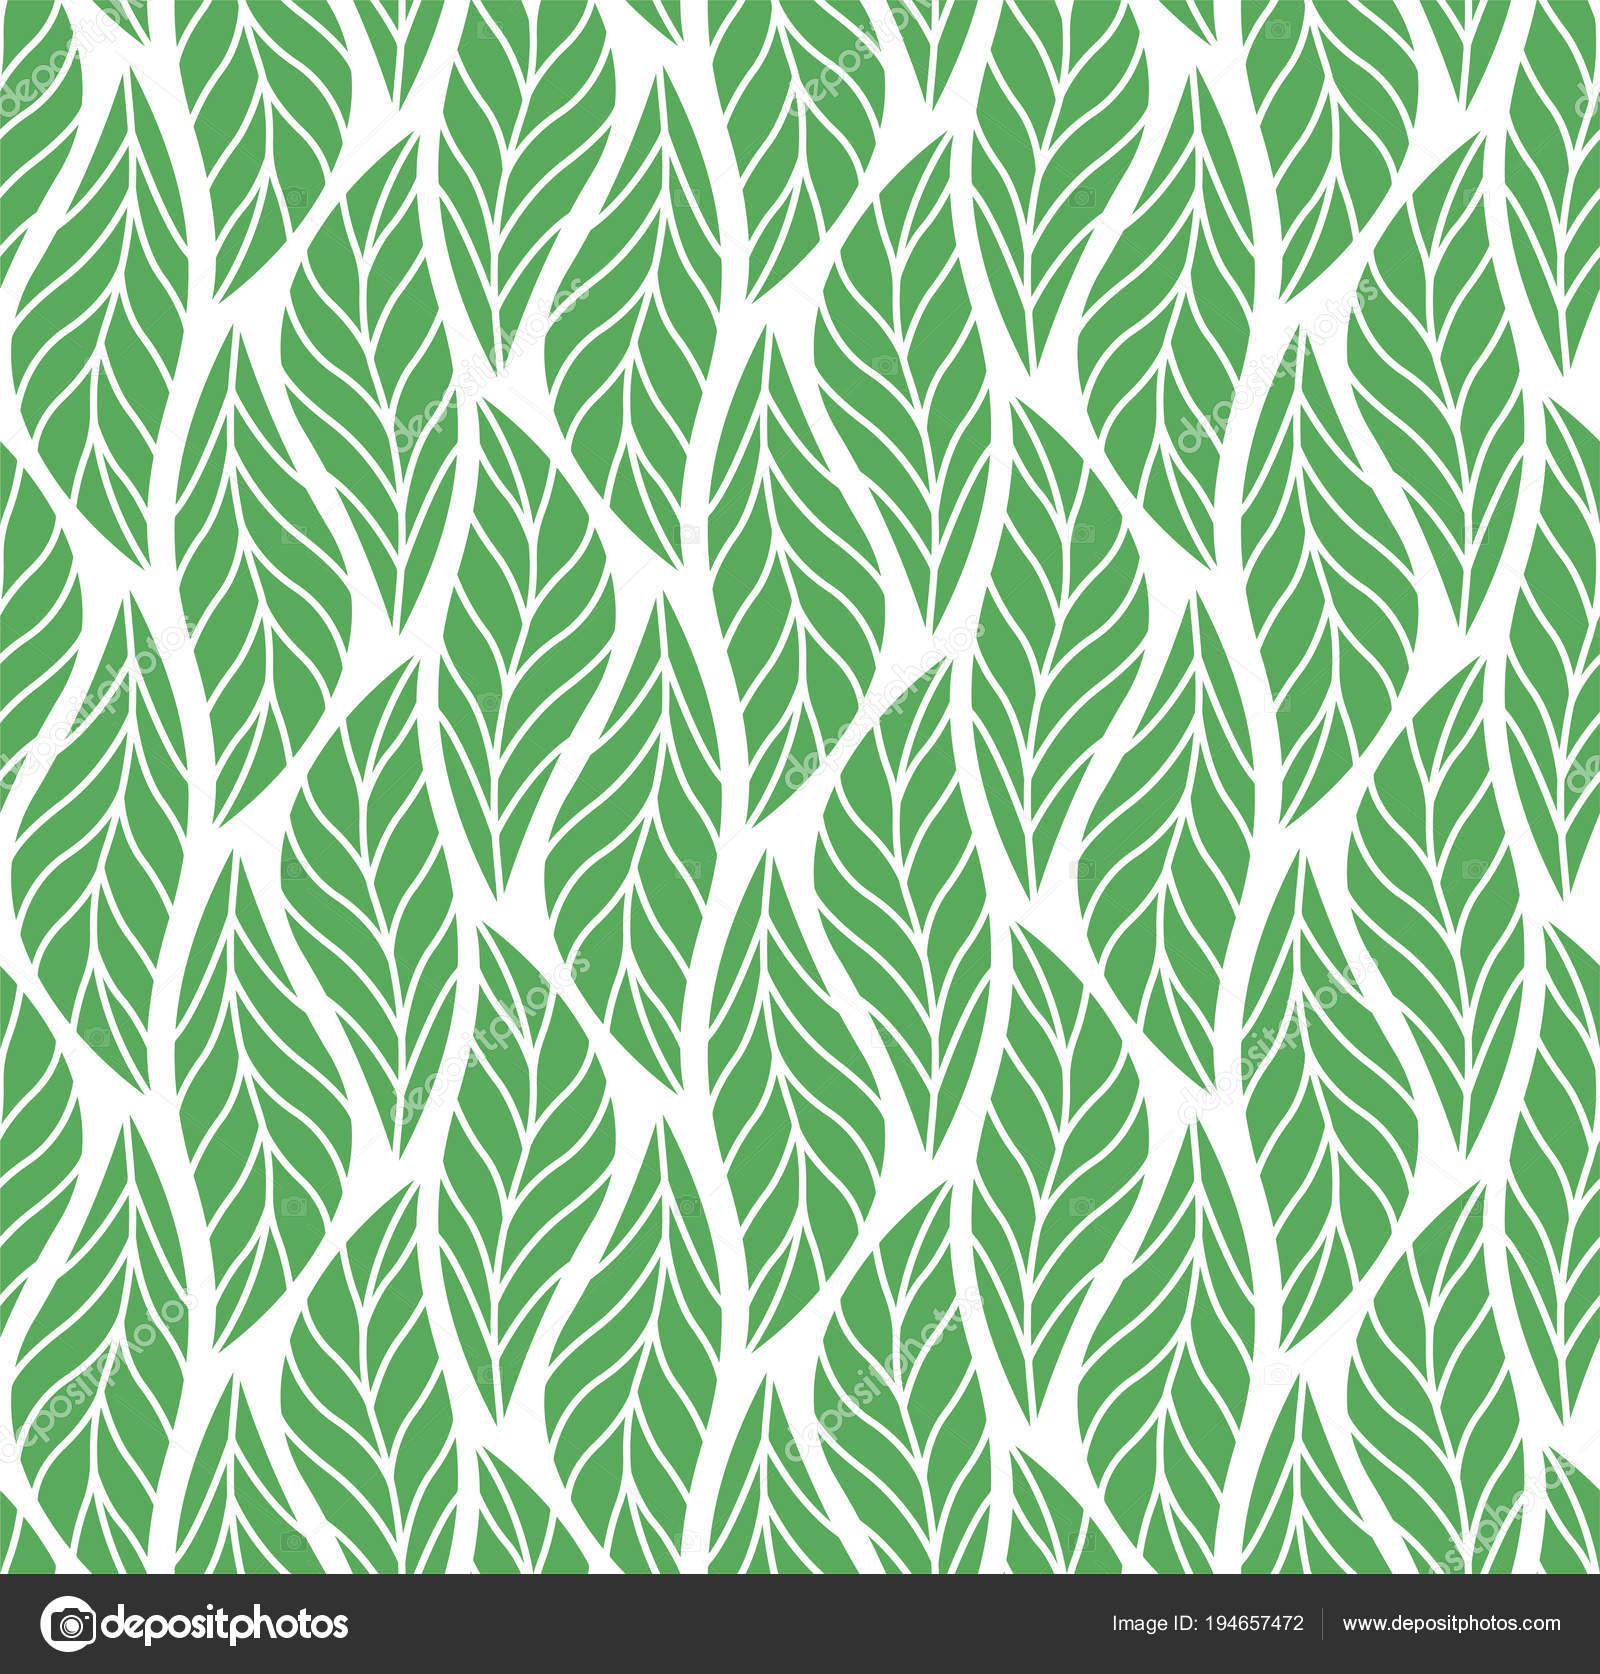 Trendy Tropical Leaves Vector Seamless Pattern Floral Organic ...